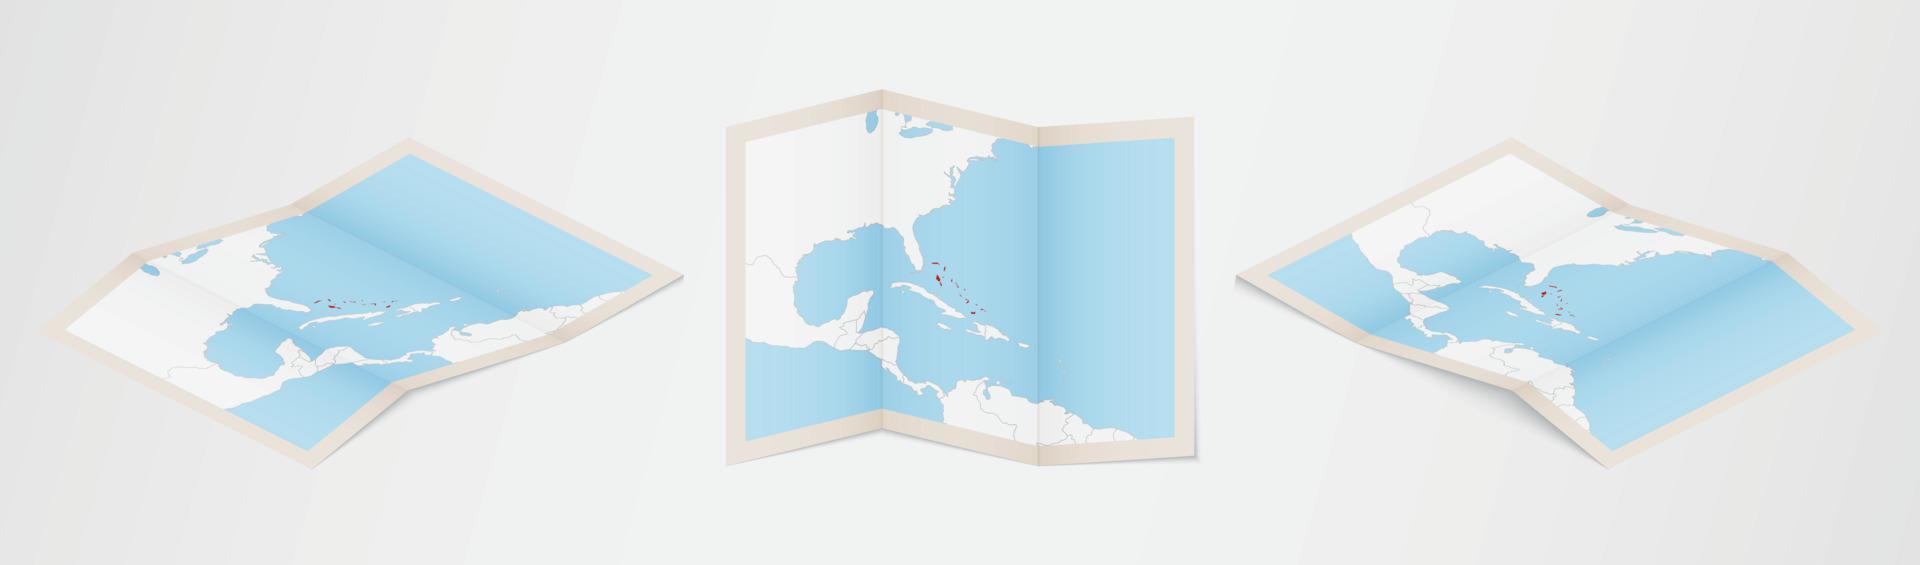 Folded map of The Bahamas in three different versions. vector